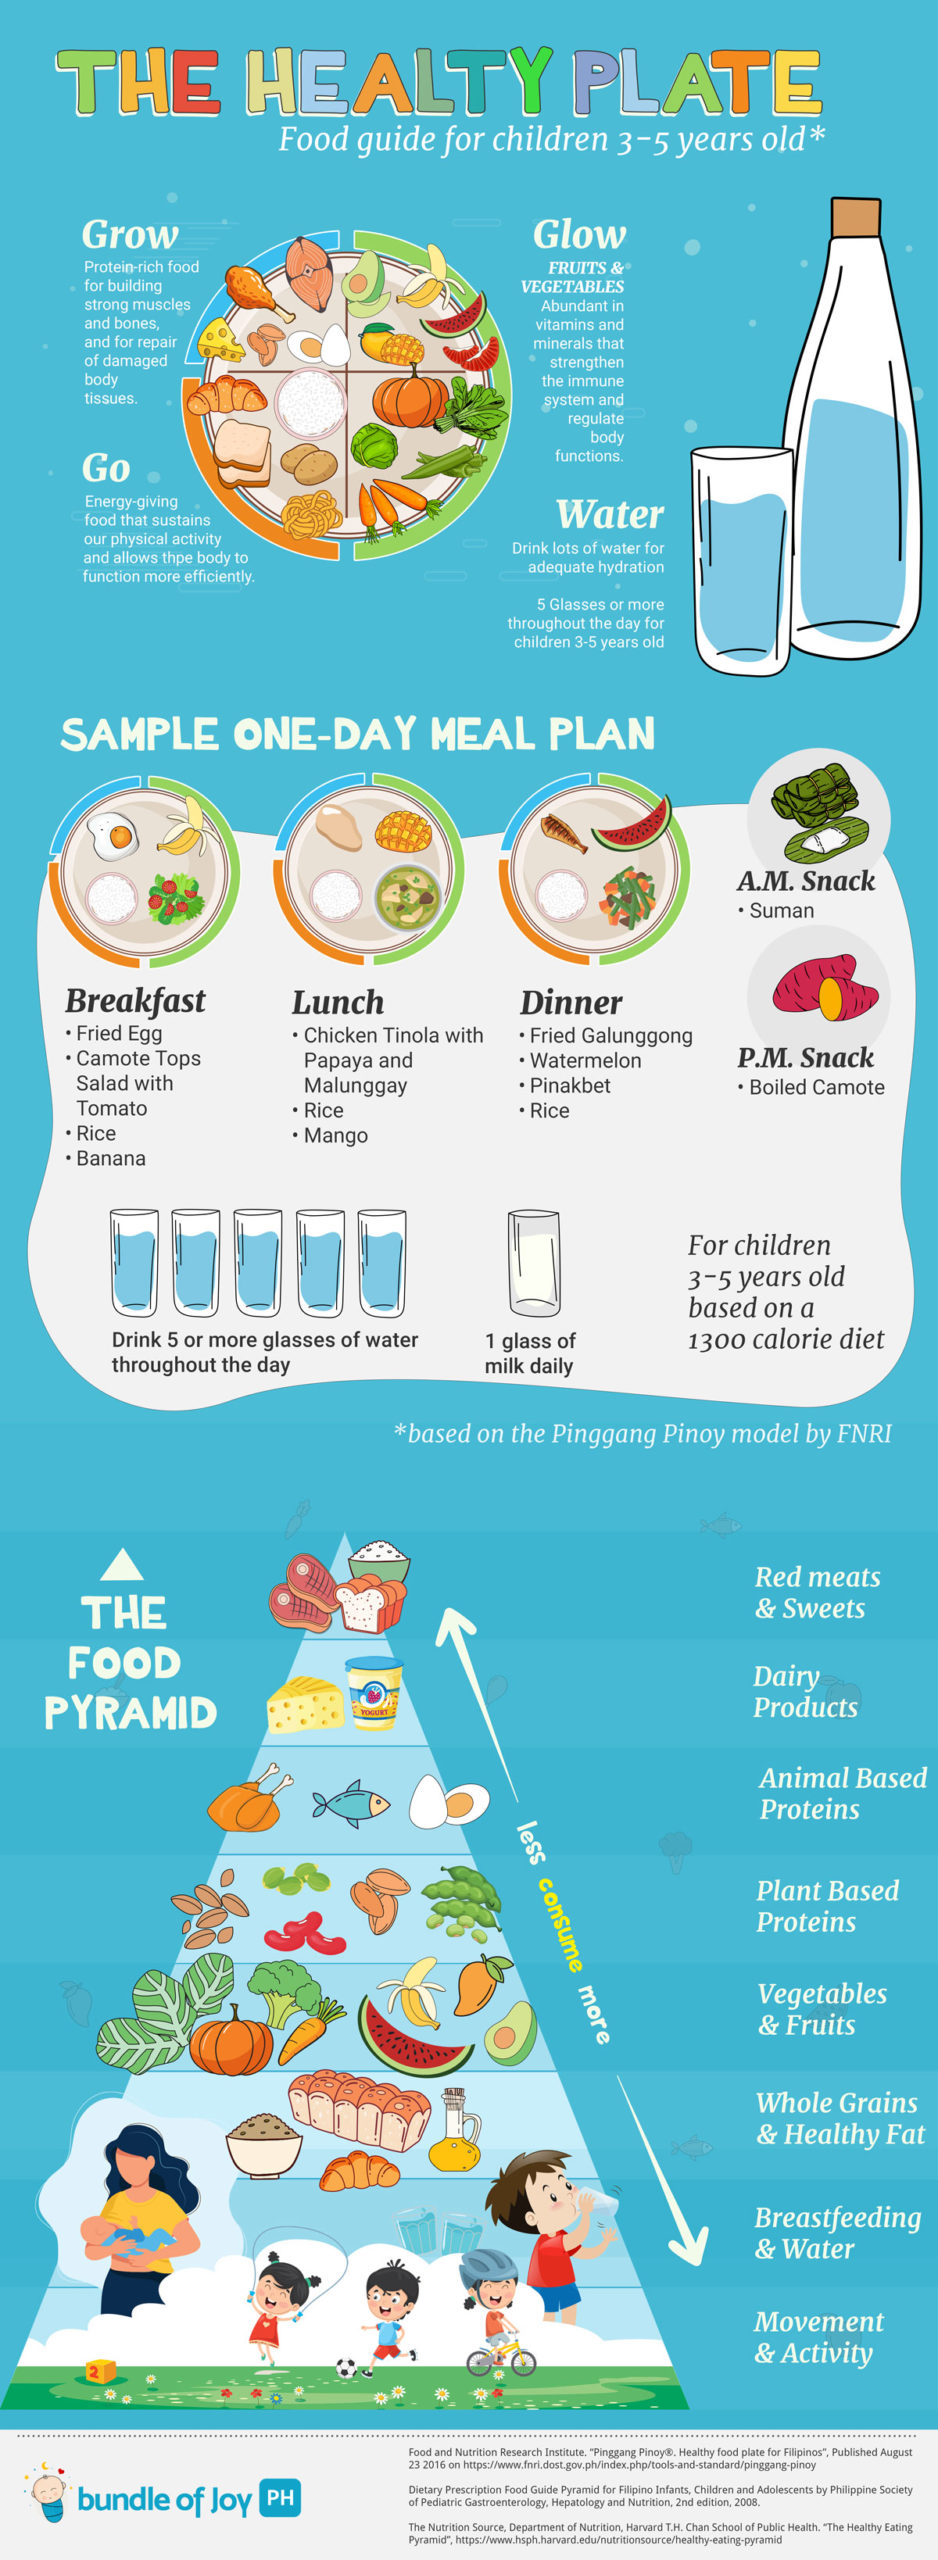 The Healthy Plate - Food guide for children 3-5 years old.